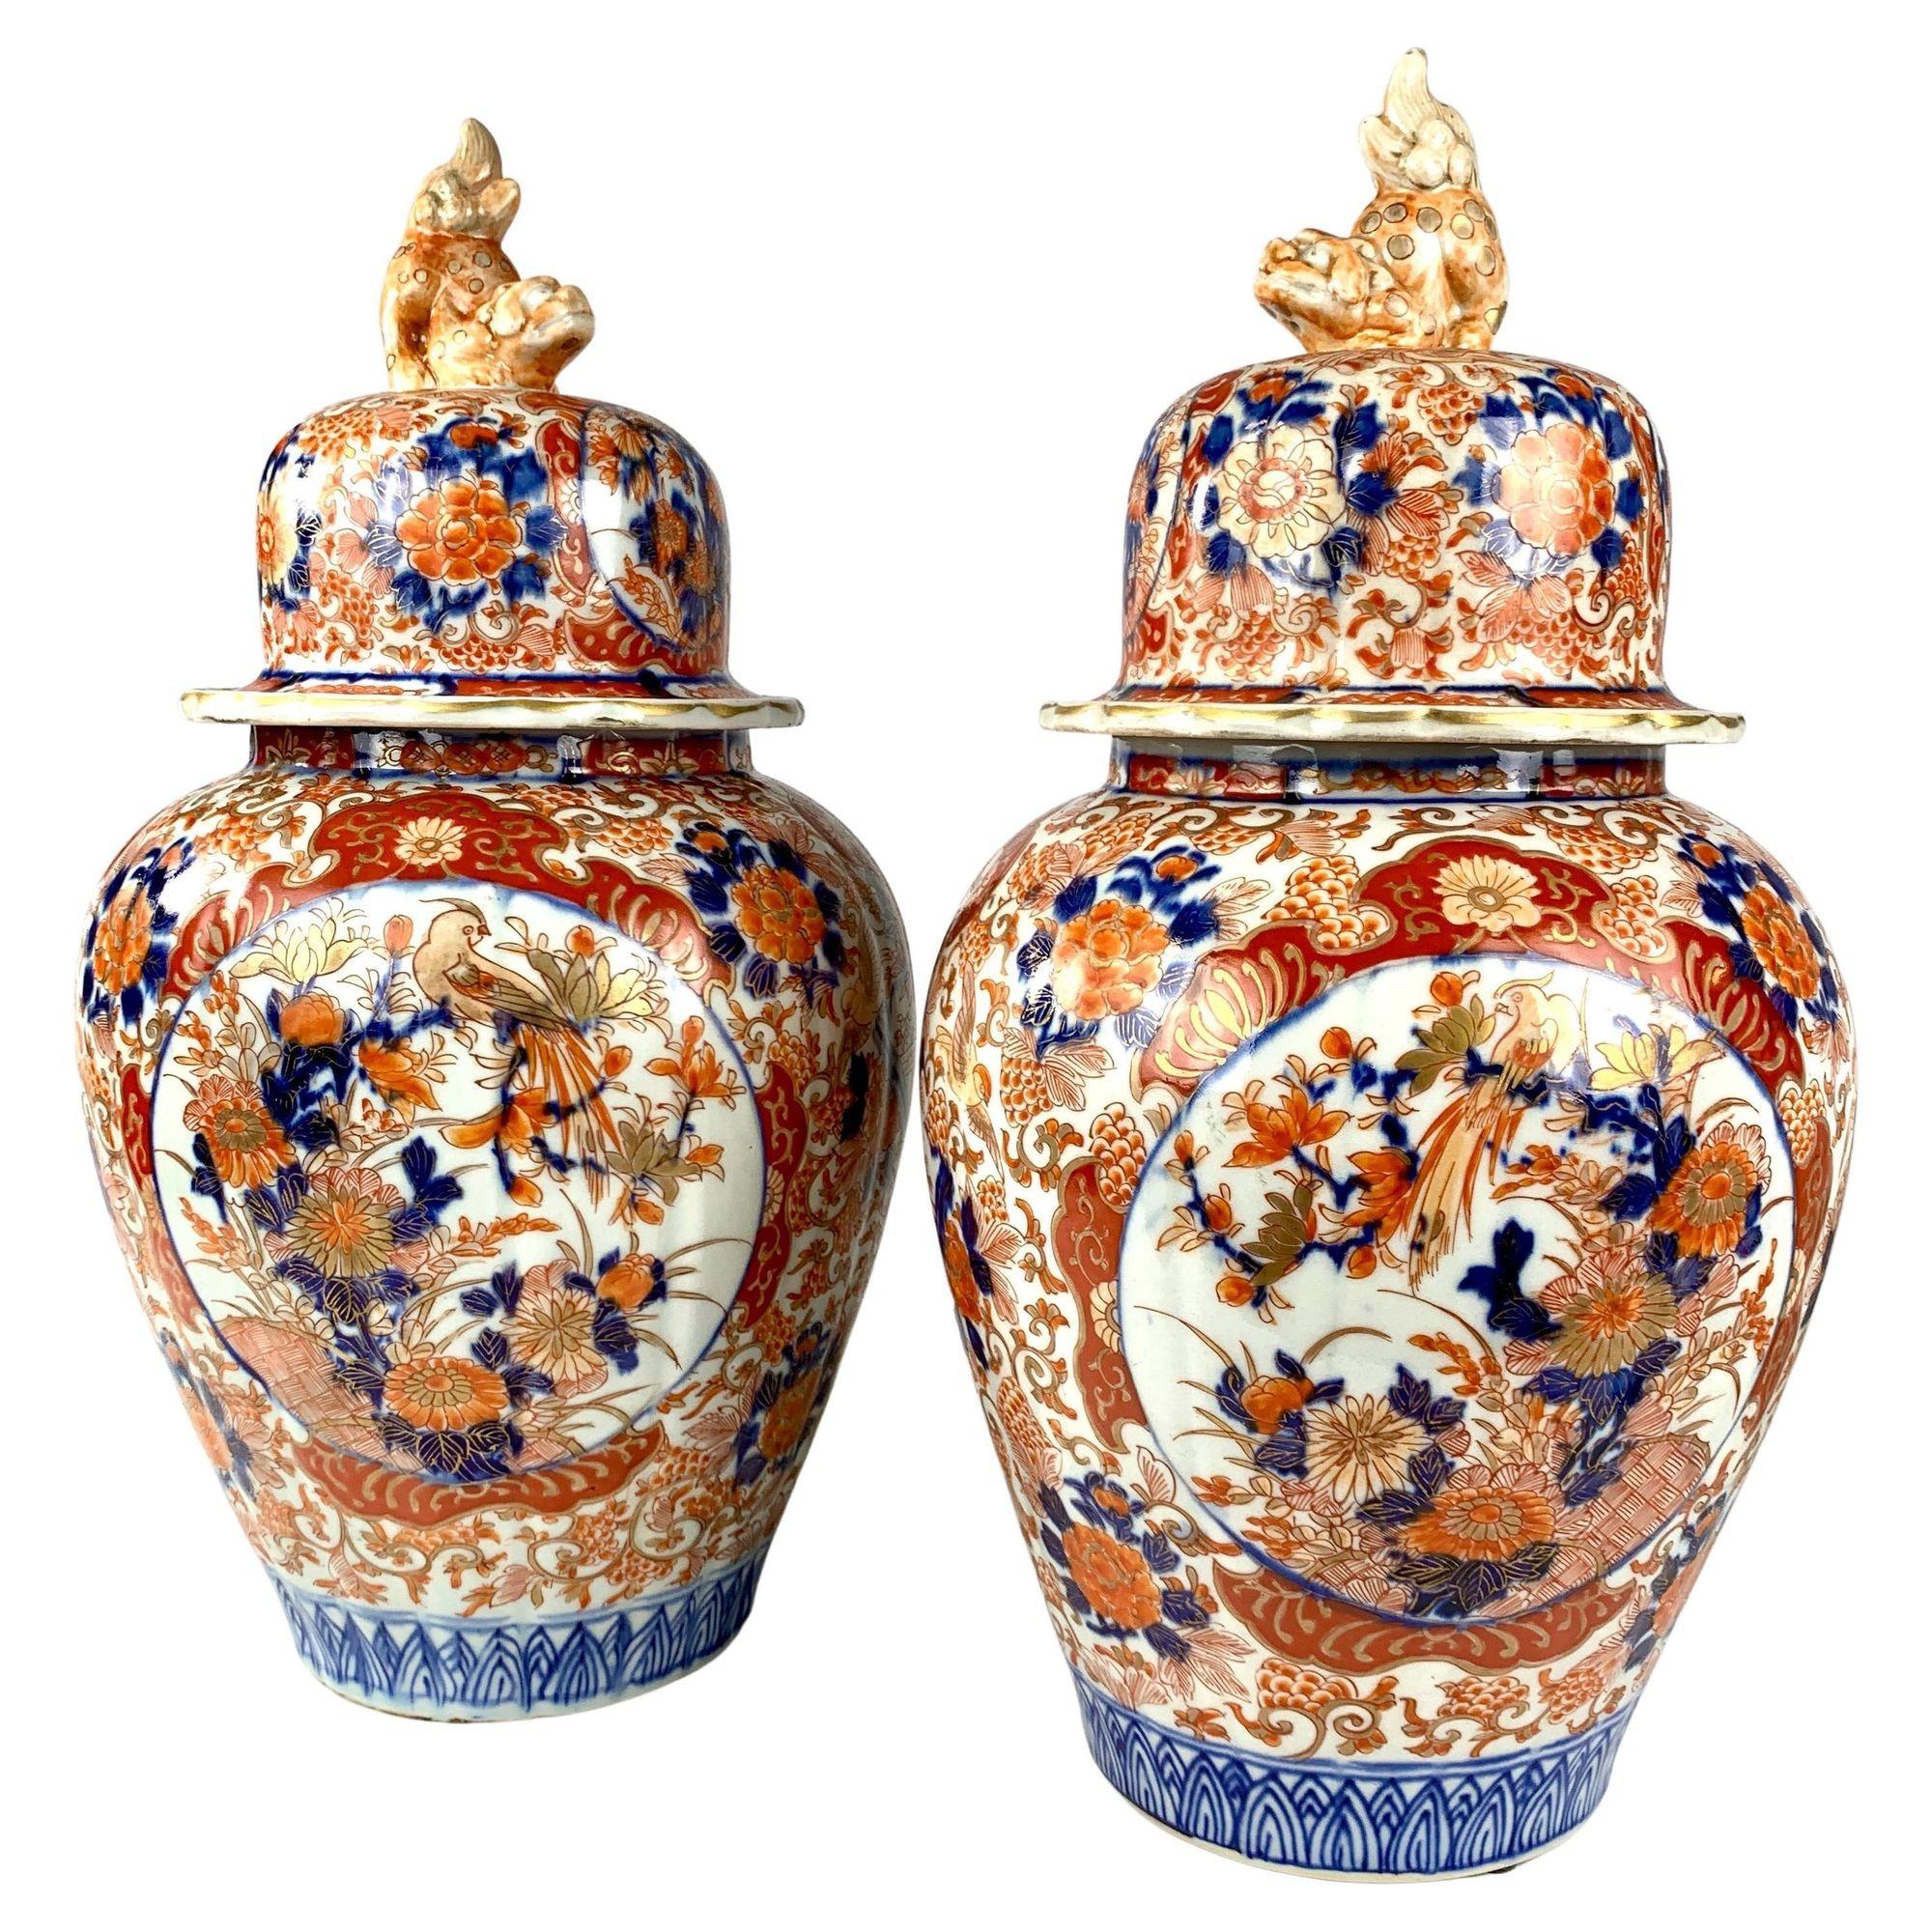 Two pairs of Imari jars.
Price for the four jars: $7,200
Pair 1 (in front of pair 2)
Hand-painted in Imari designs, both jars show beautiful waterside scenes in cobalt blue, gilt, and two tones of iron red. The colors are exquisite and intense.